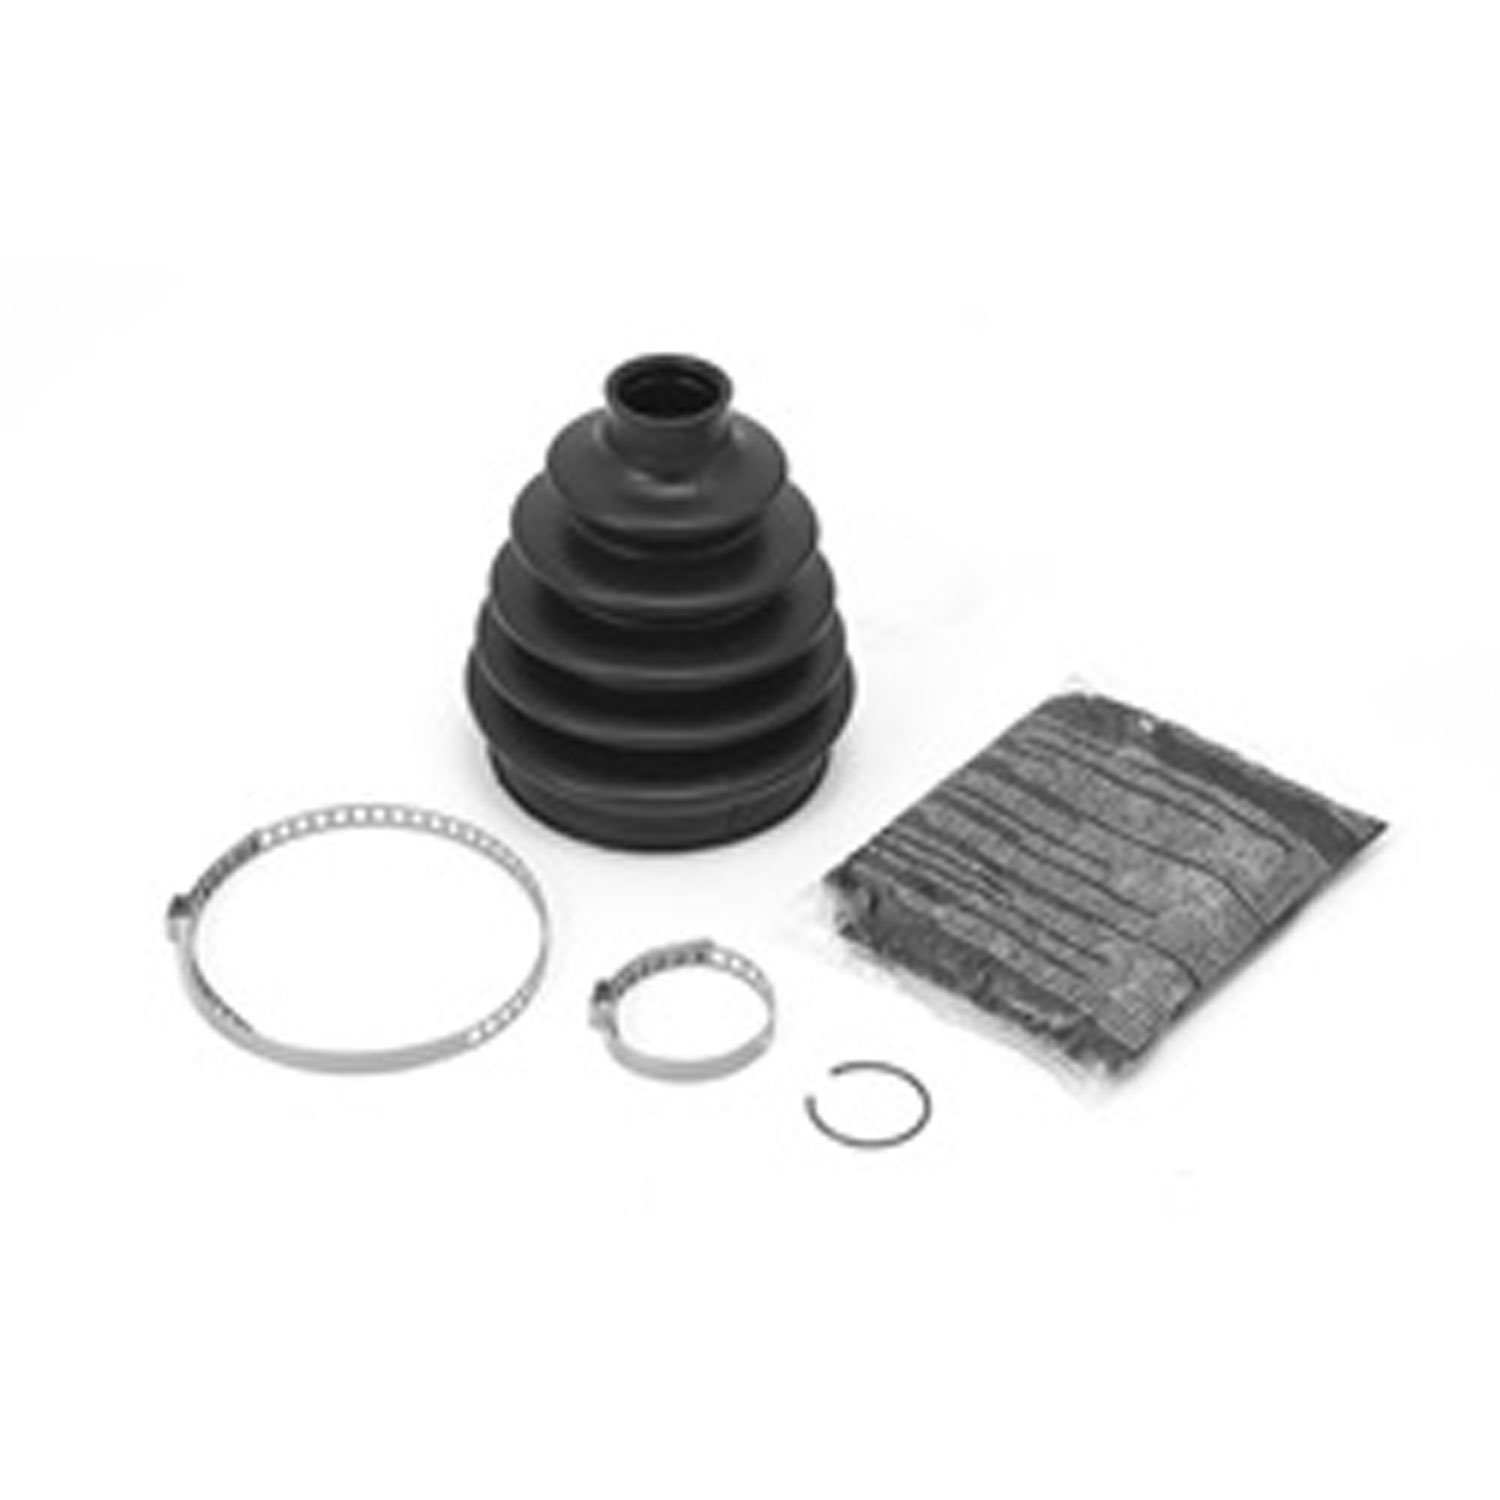 This front inner axle CV boot kit from Omix-ADA fits the left or right side of 05-10 Jeep Grand Cherokee WK .